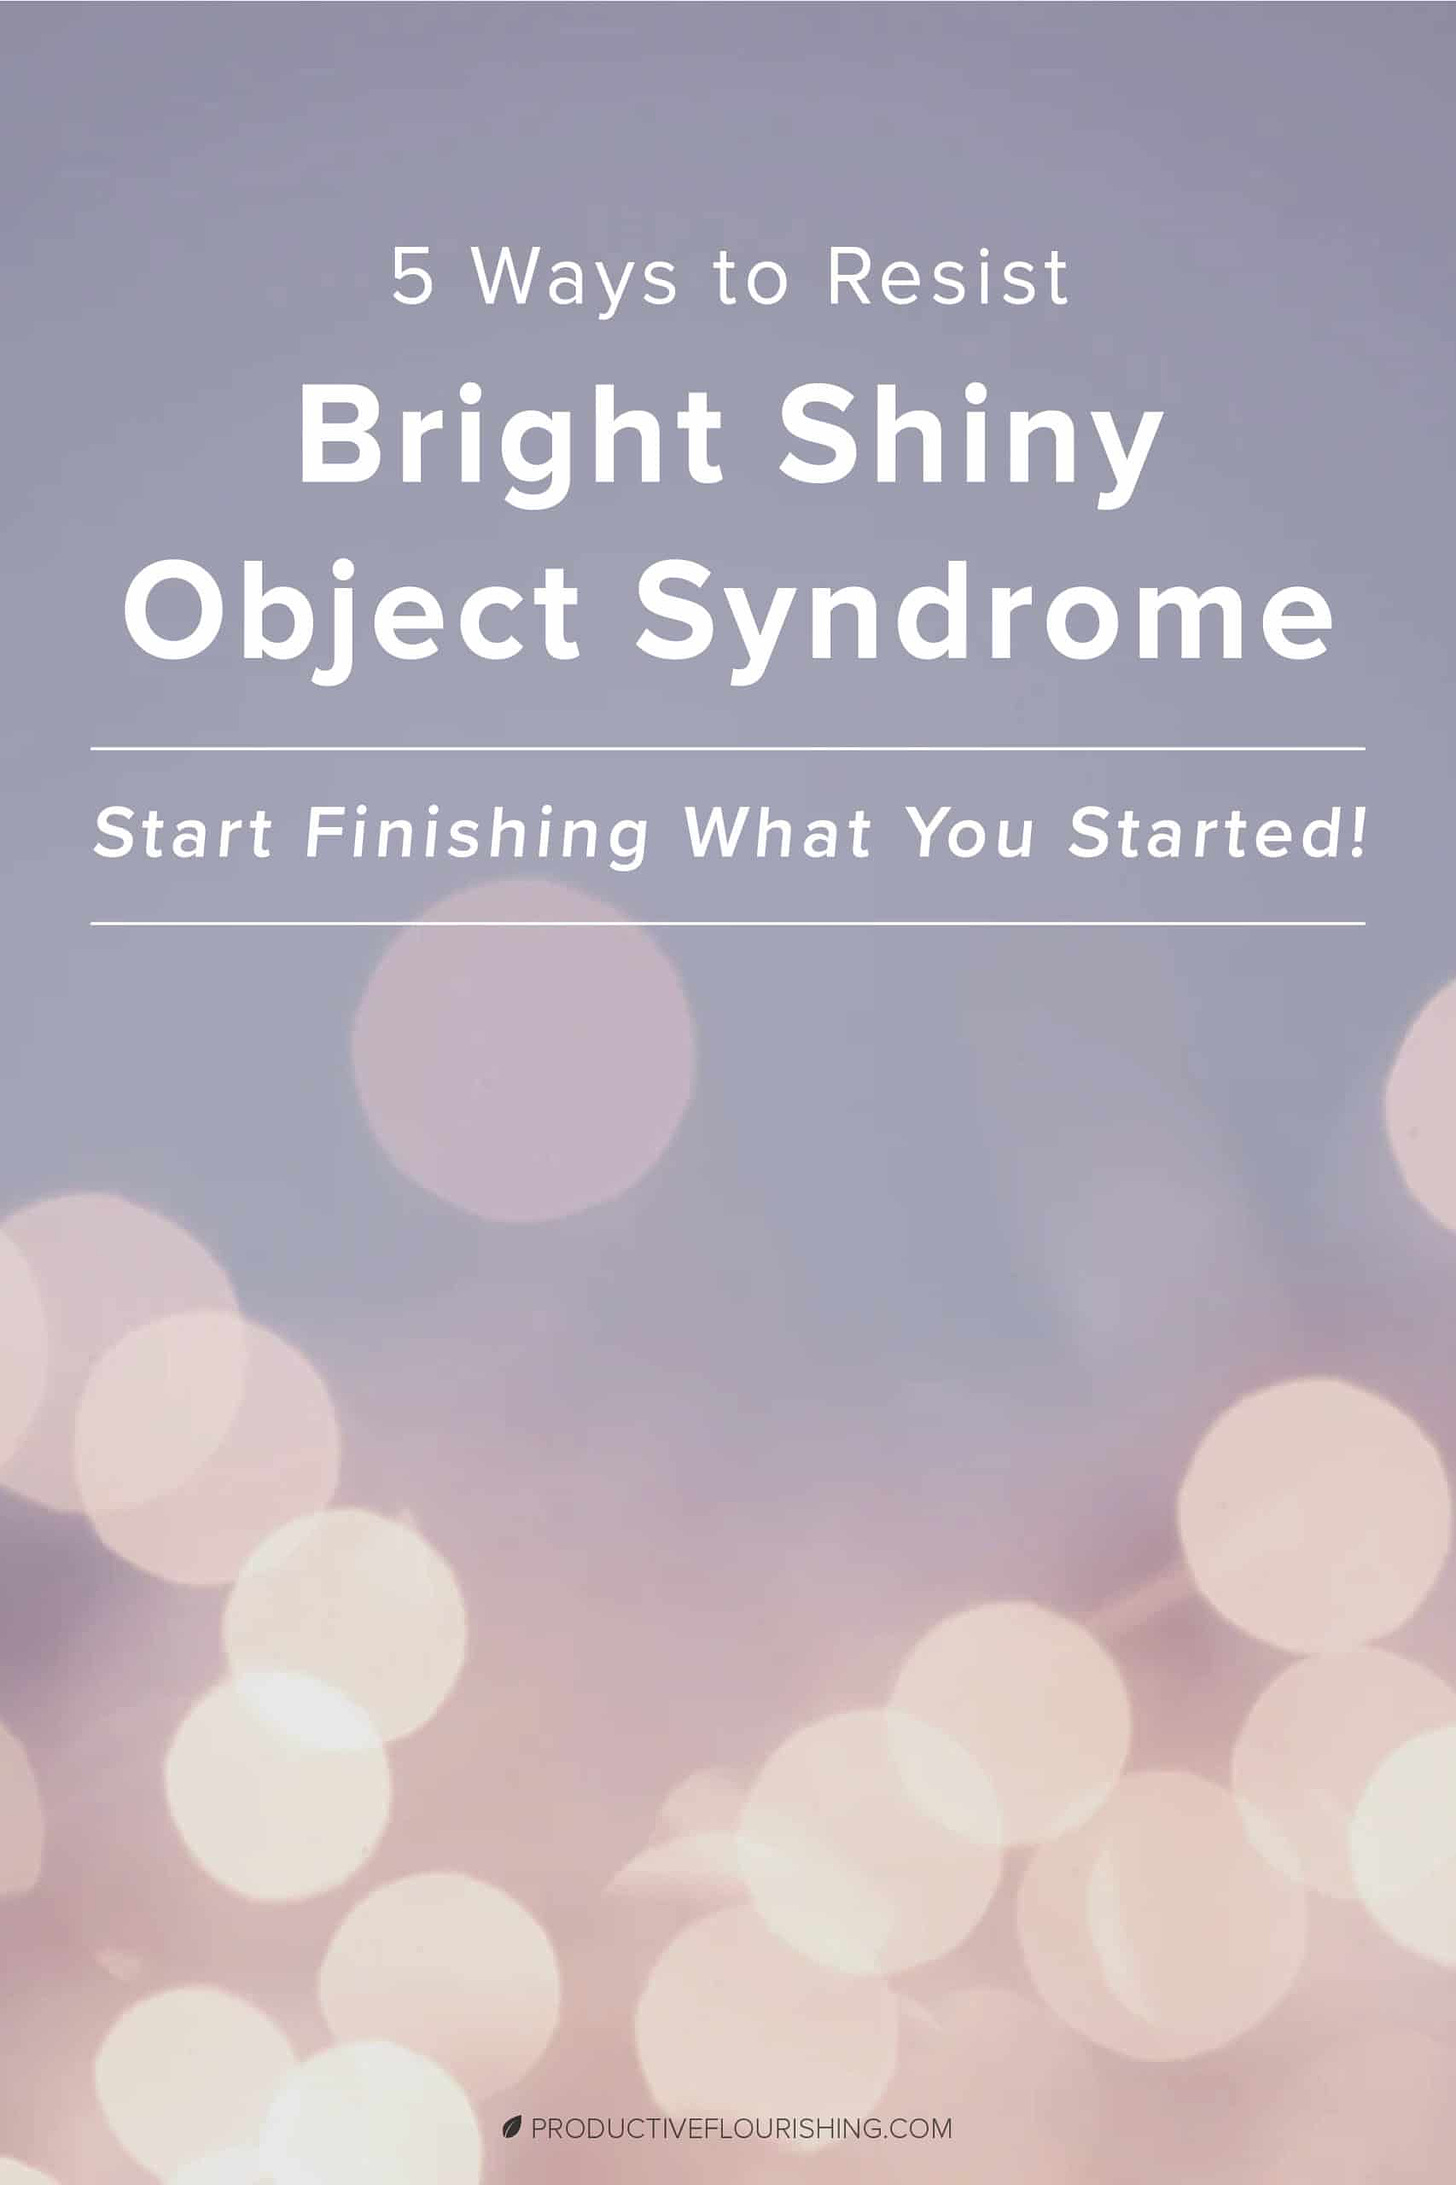 5 Ways To Stay Focused: Resist Bright Shiny Object Syndrome with these 5 easy steps. Work your way down the creative process funnel with guest author, Cynthia Morris, as she shares her tips on focusing. Skills to practice so you can always finish what you start. #howtofocus #productiveflourishing